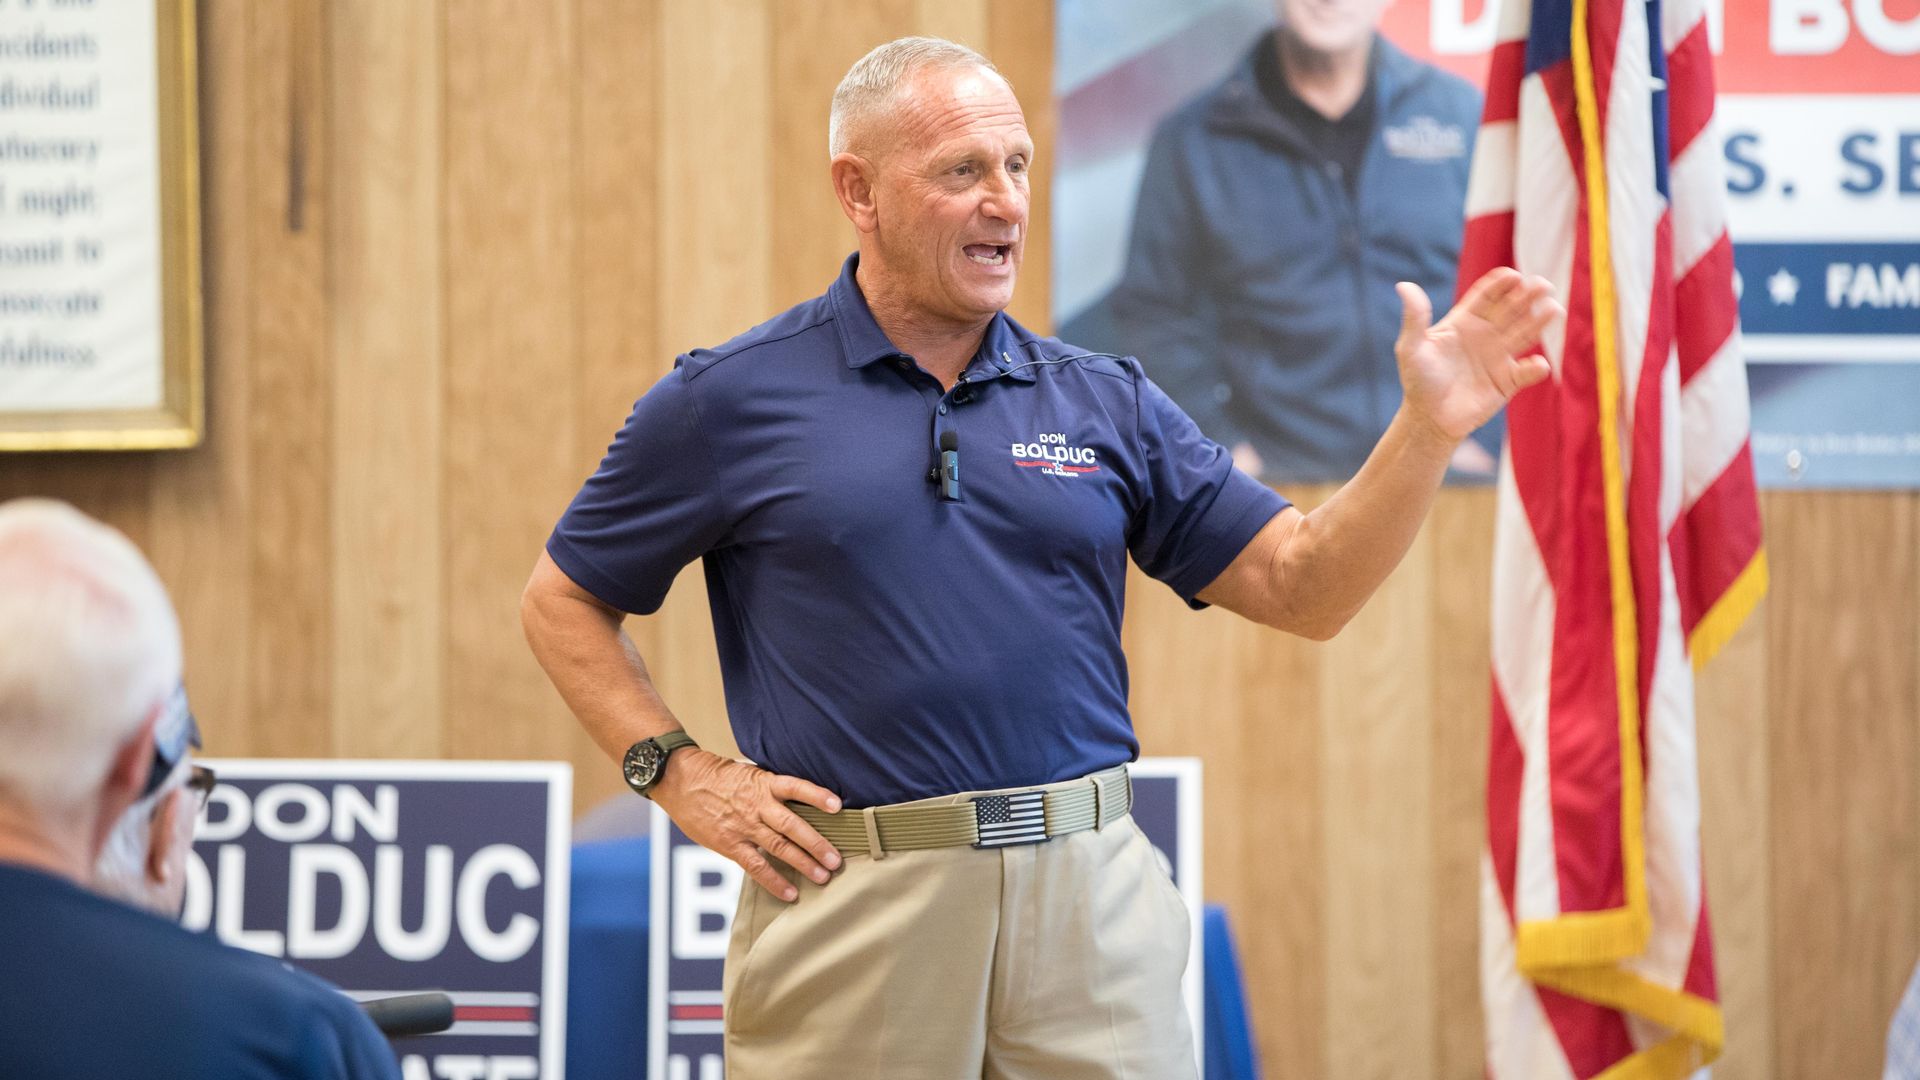 Republican Senate candidate Don Bolduc greets supporters at a town hall event. (Photo by Scott Eisen/Getty Images)